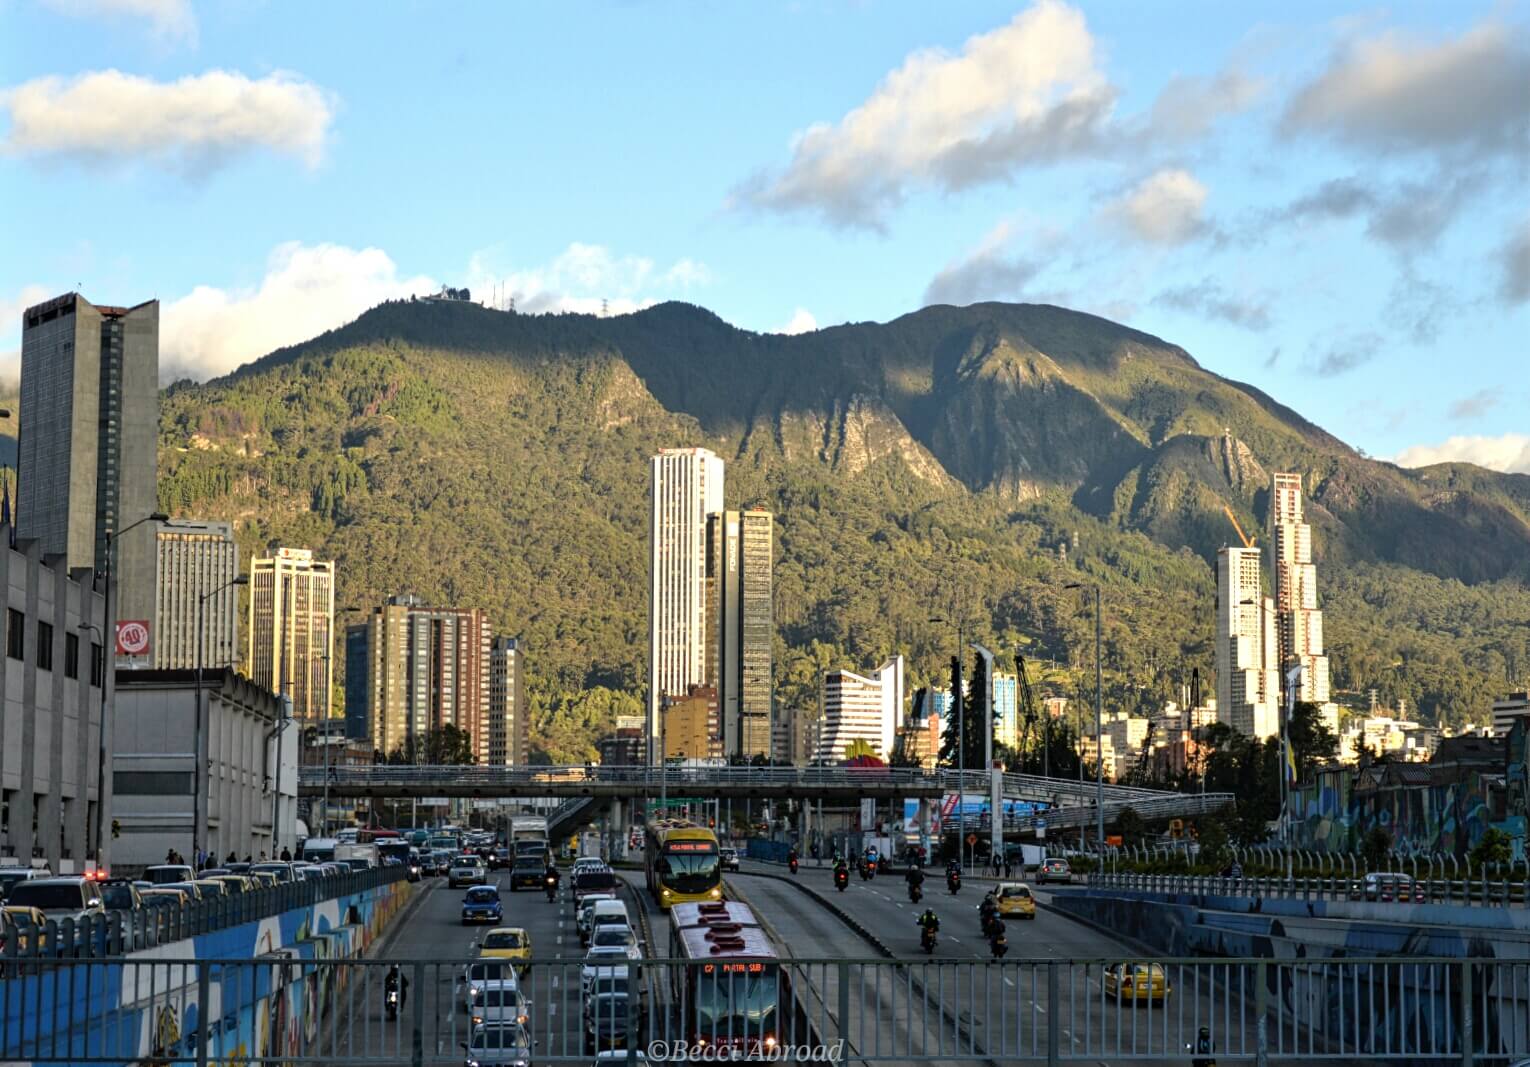 You know the feeling of arriving to a new country and being afraid to run directly into an airport scam? Here I share my travel story about Bogotá, Colombia